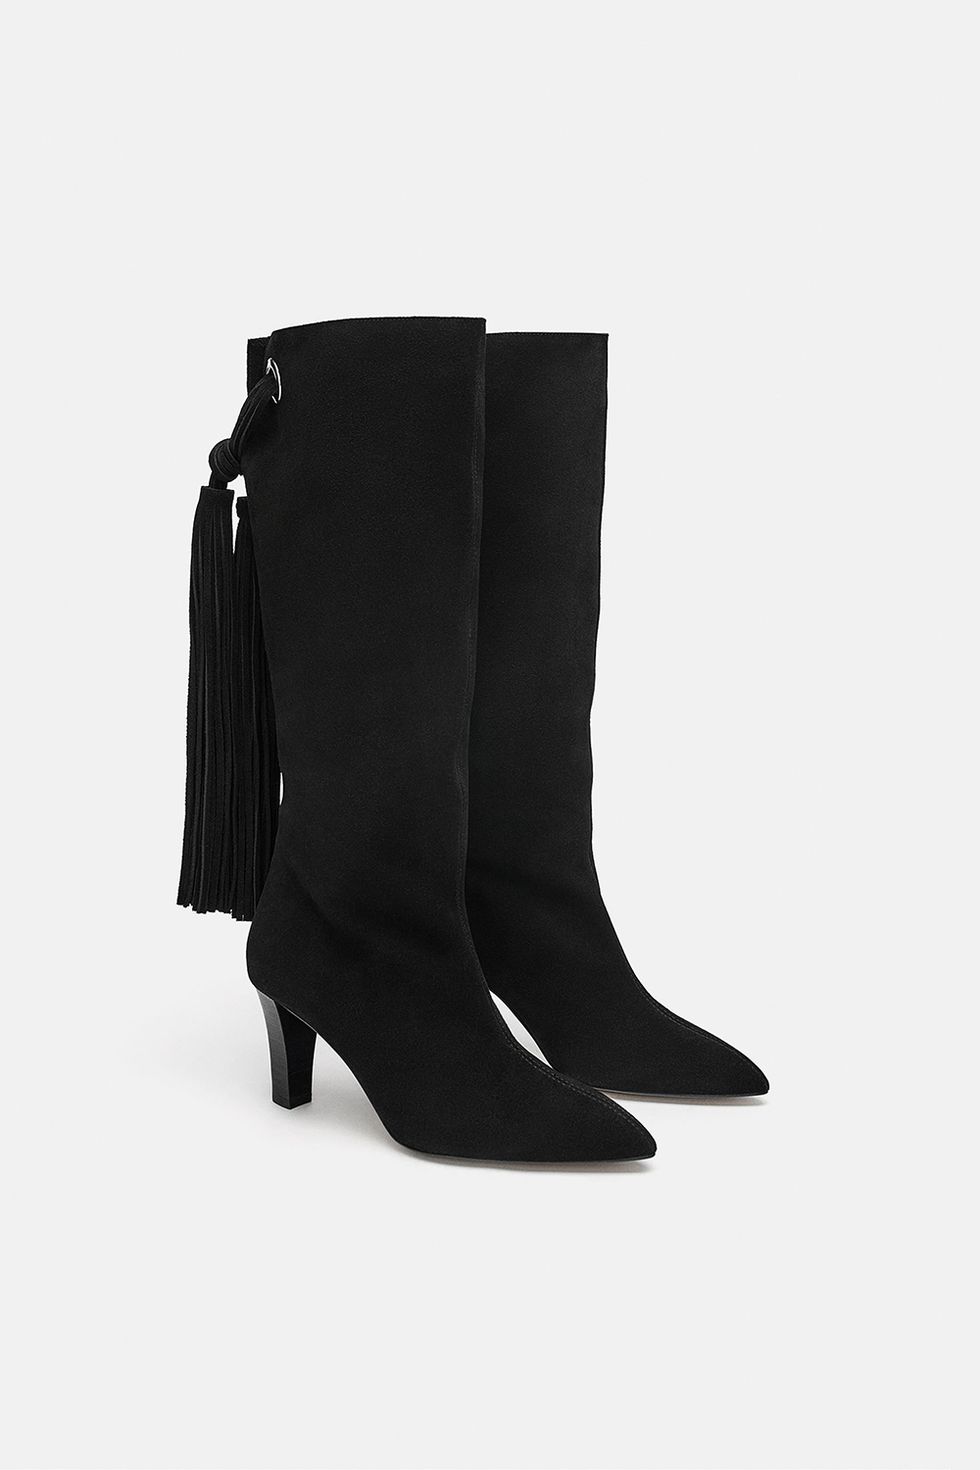 Footwear, Boot, Shoe, Leather, High heels, Knee-high boot, Suede, Leg, Joint, Riding boot, 